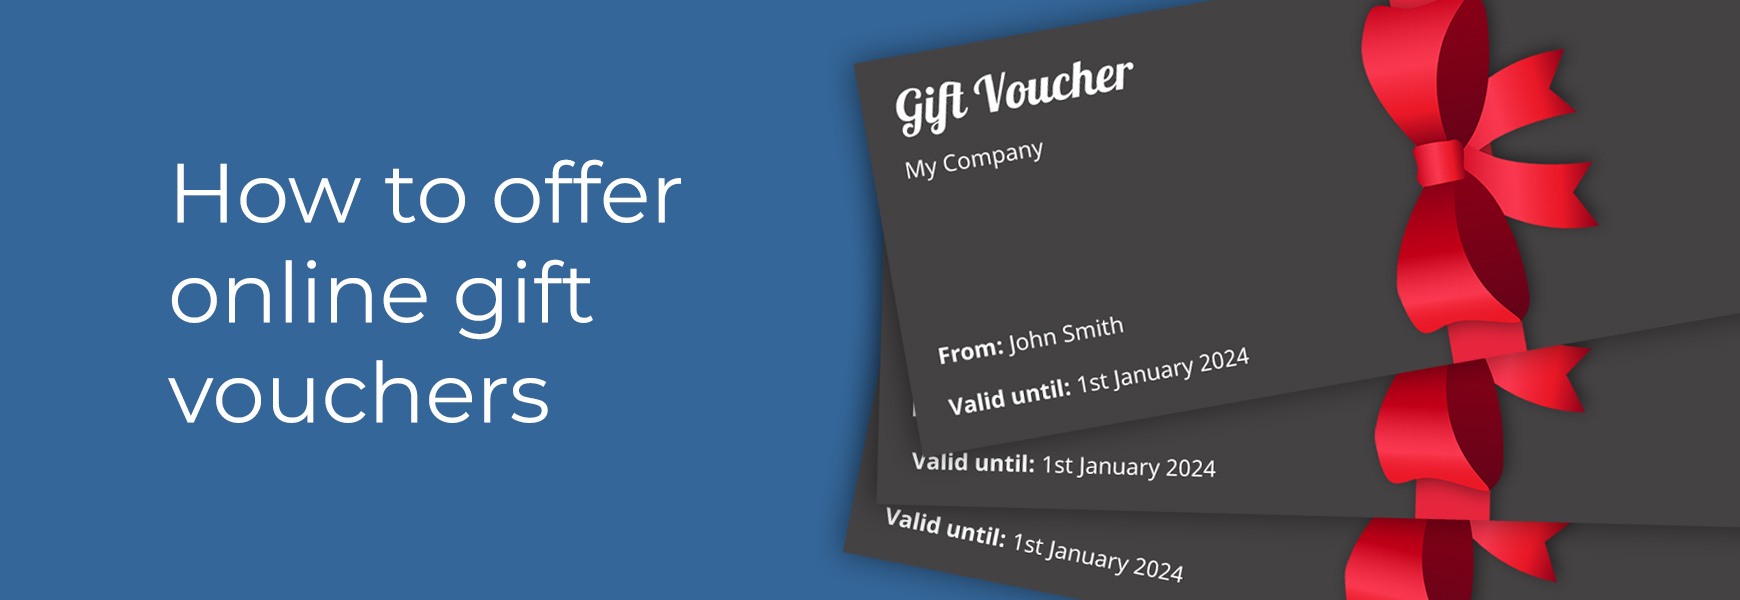 How to offer online gift vouchers